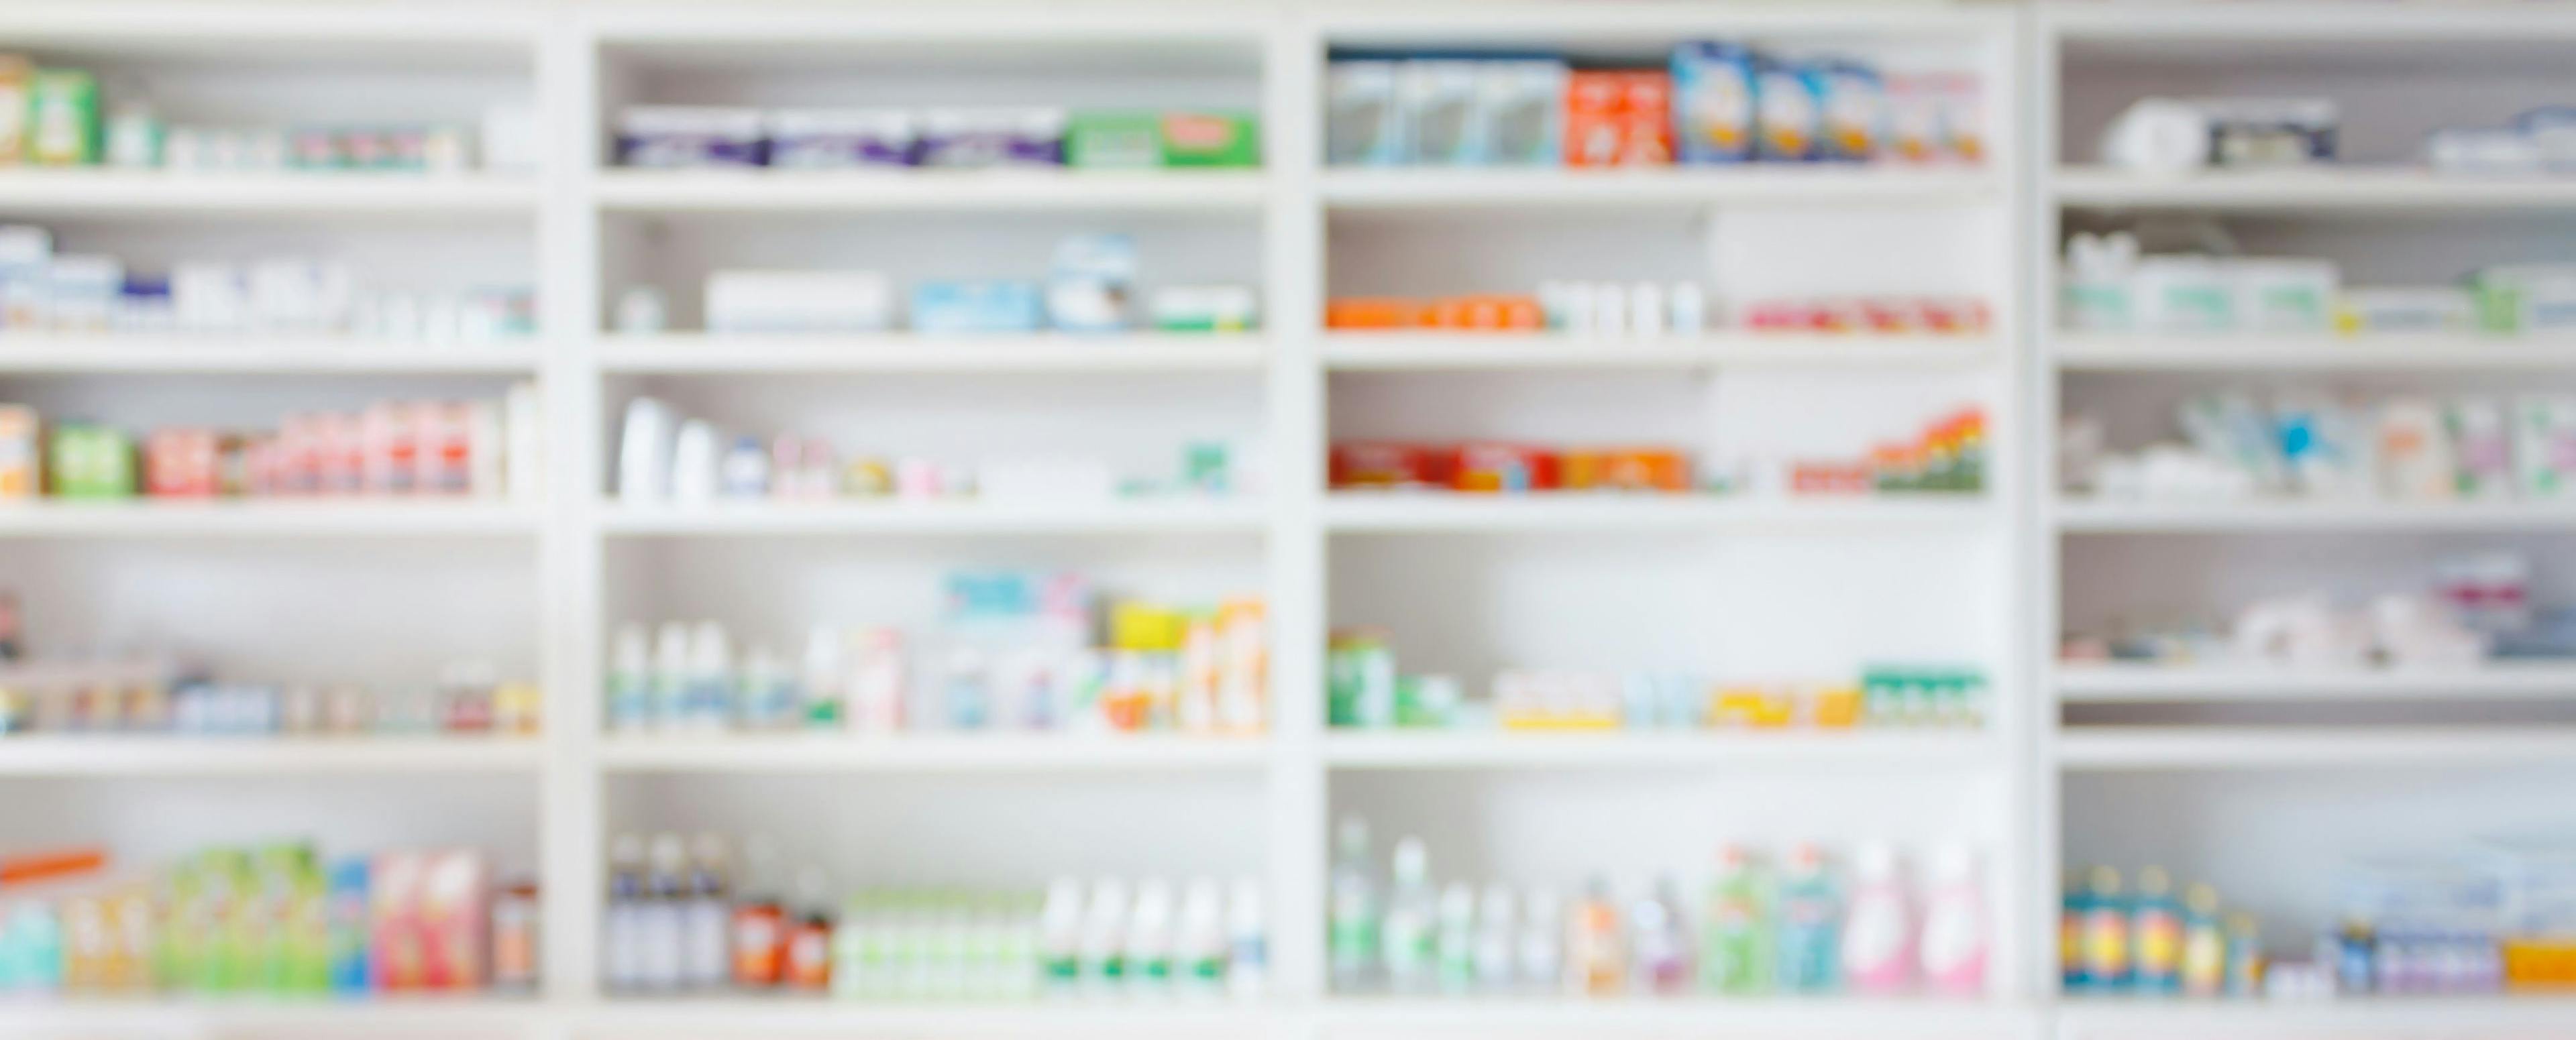 Should Physicians Be Allowed to Dispense Medications?